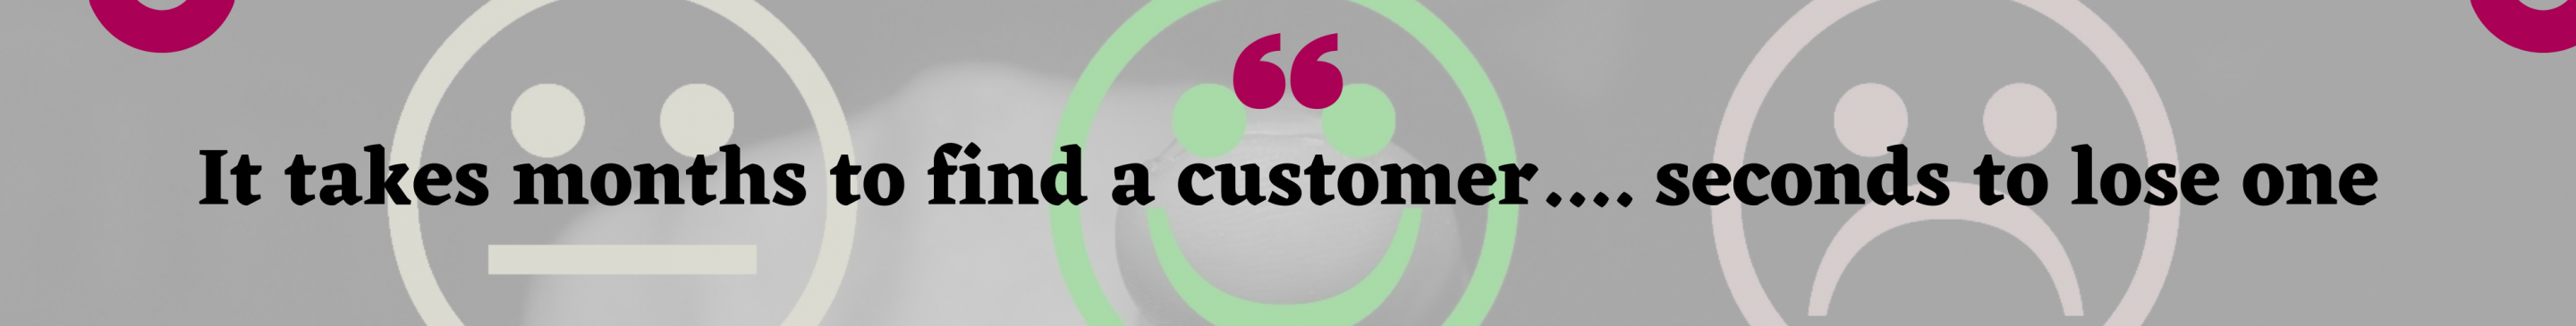 quote-5 ways to deliver excellent customer service